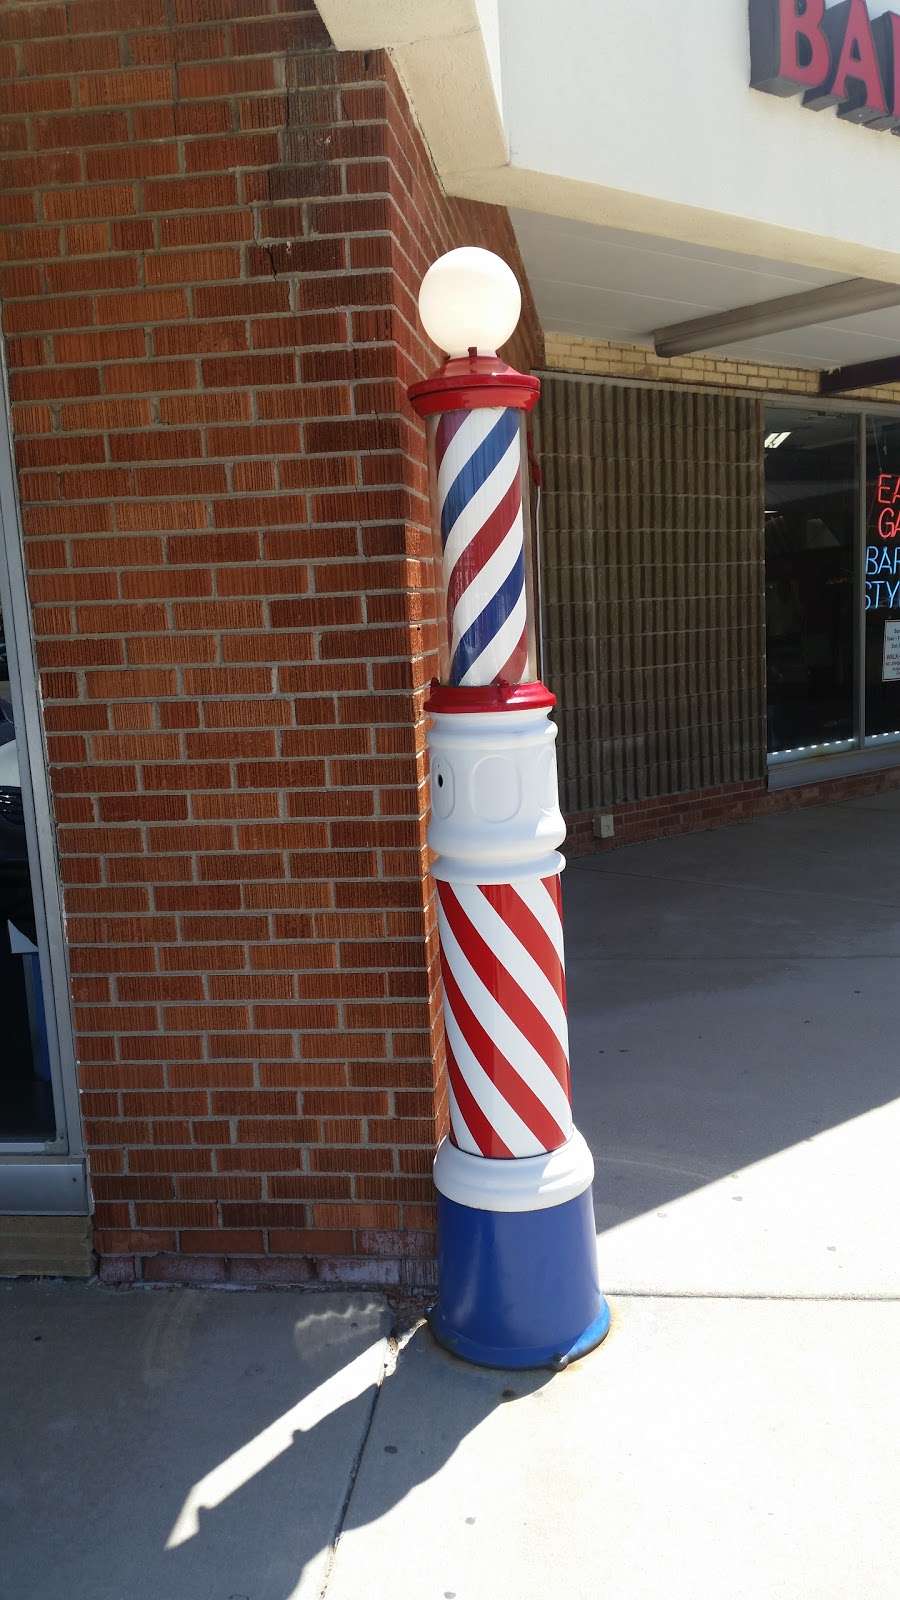 EastGate Barber Salon | B-, 837 South Meyers Road #26, Lombard, IL 60148 | Phone: (630) 629-1488